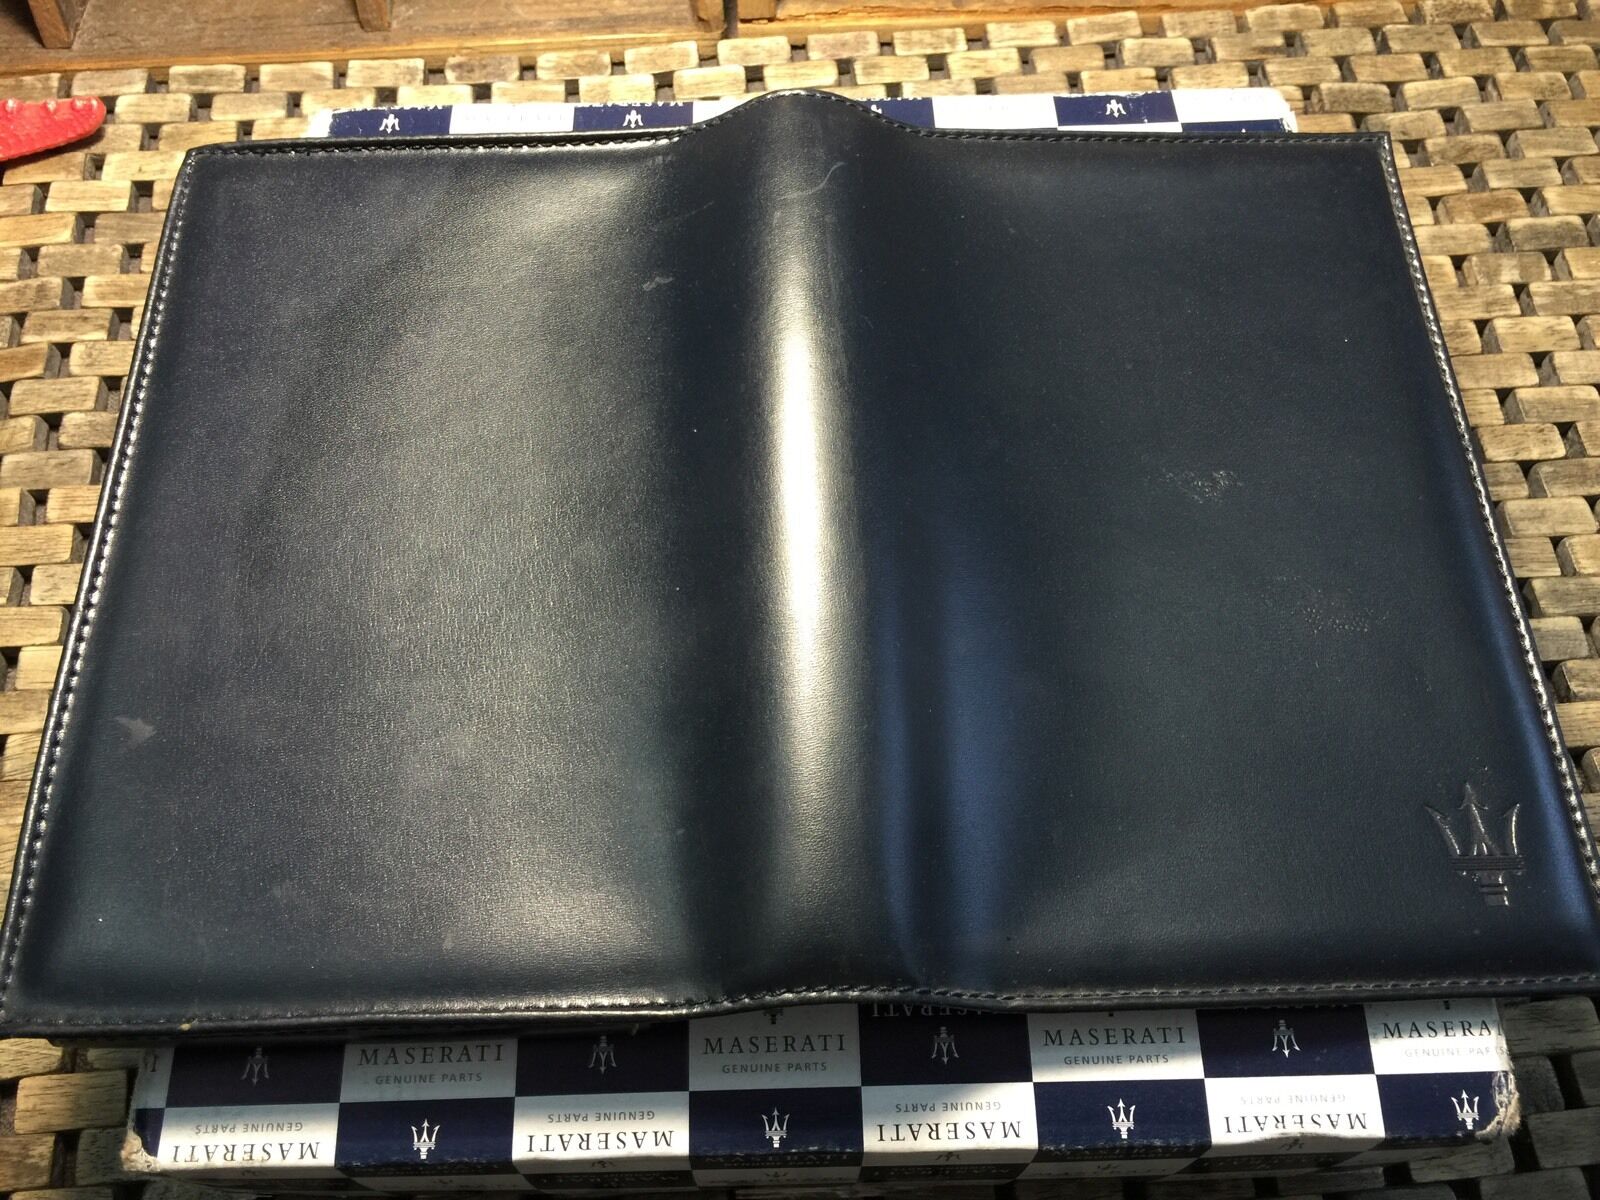 MASERATI COUPE CAMBIOCORSA GT CABIO CORSA SPYDER OWNERS MANUAL POUCH CASE (ONLY)